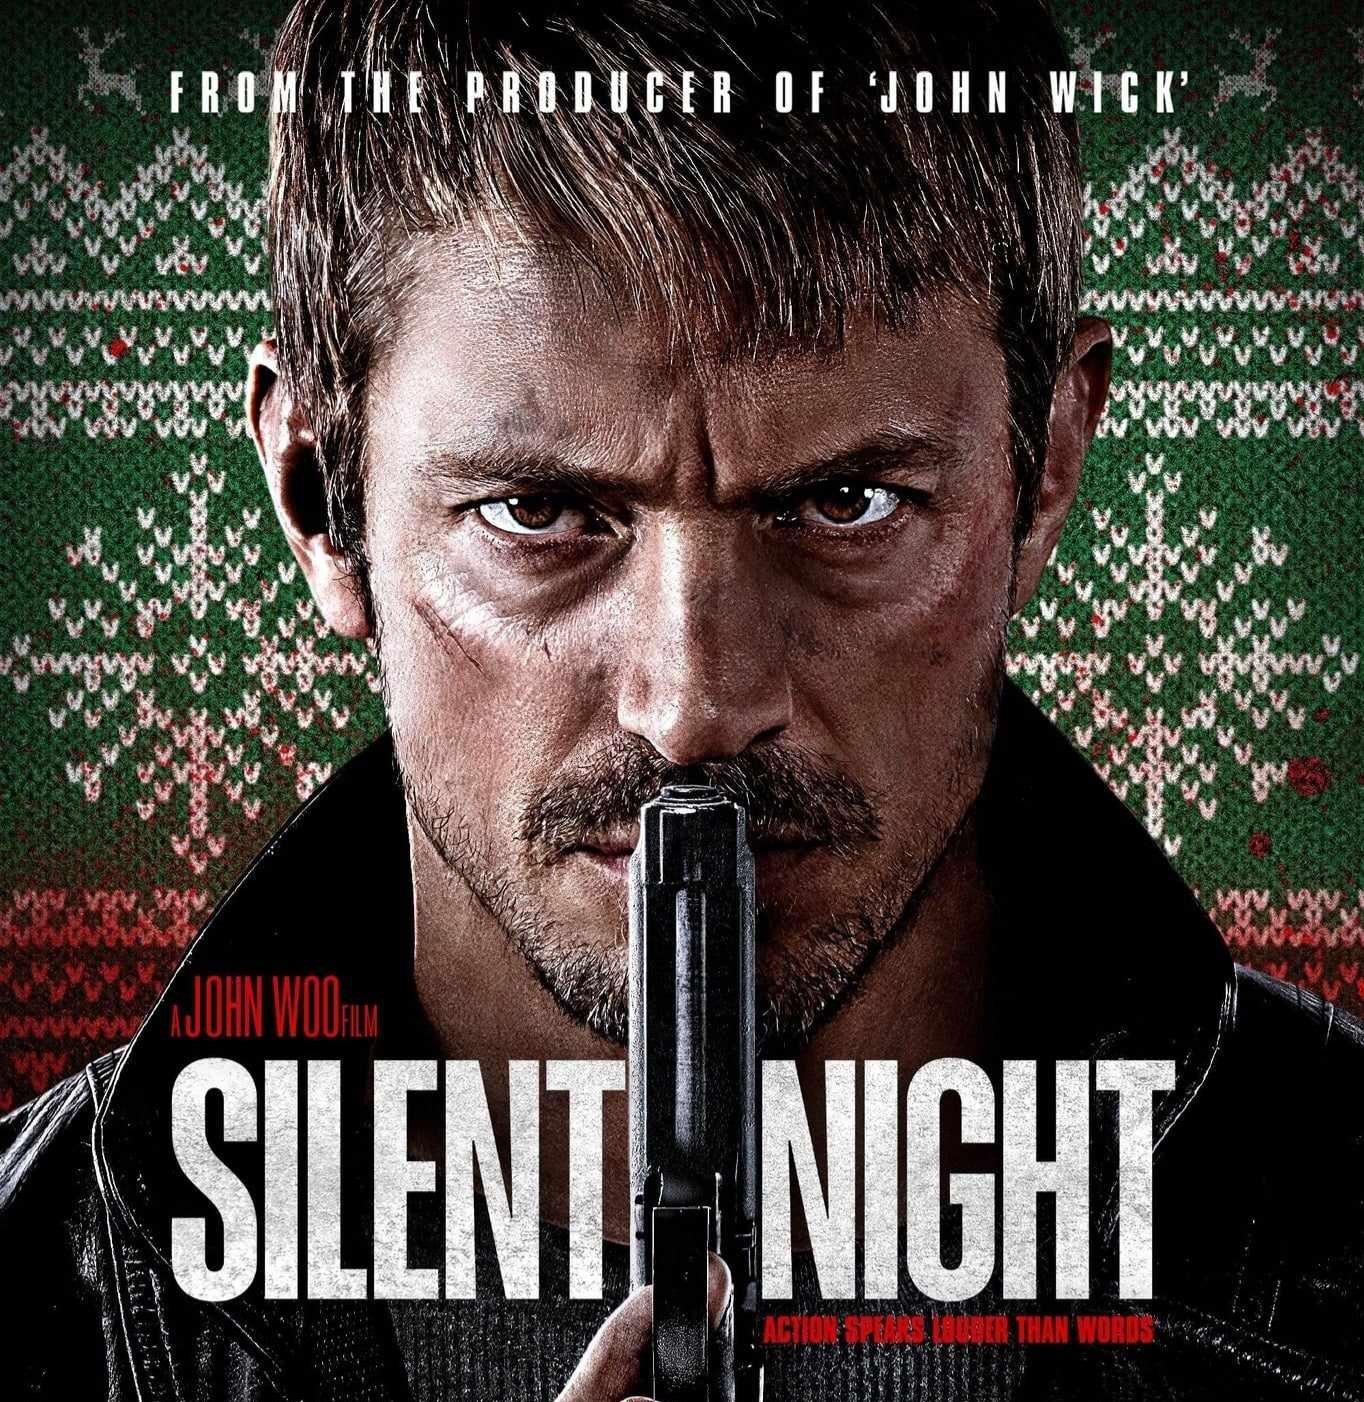 John Woos Dialogue Free Action Film Silent Night is Now Streaming on Lionsgate Play